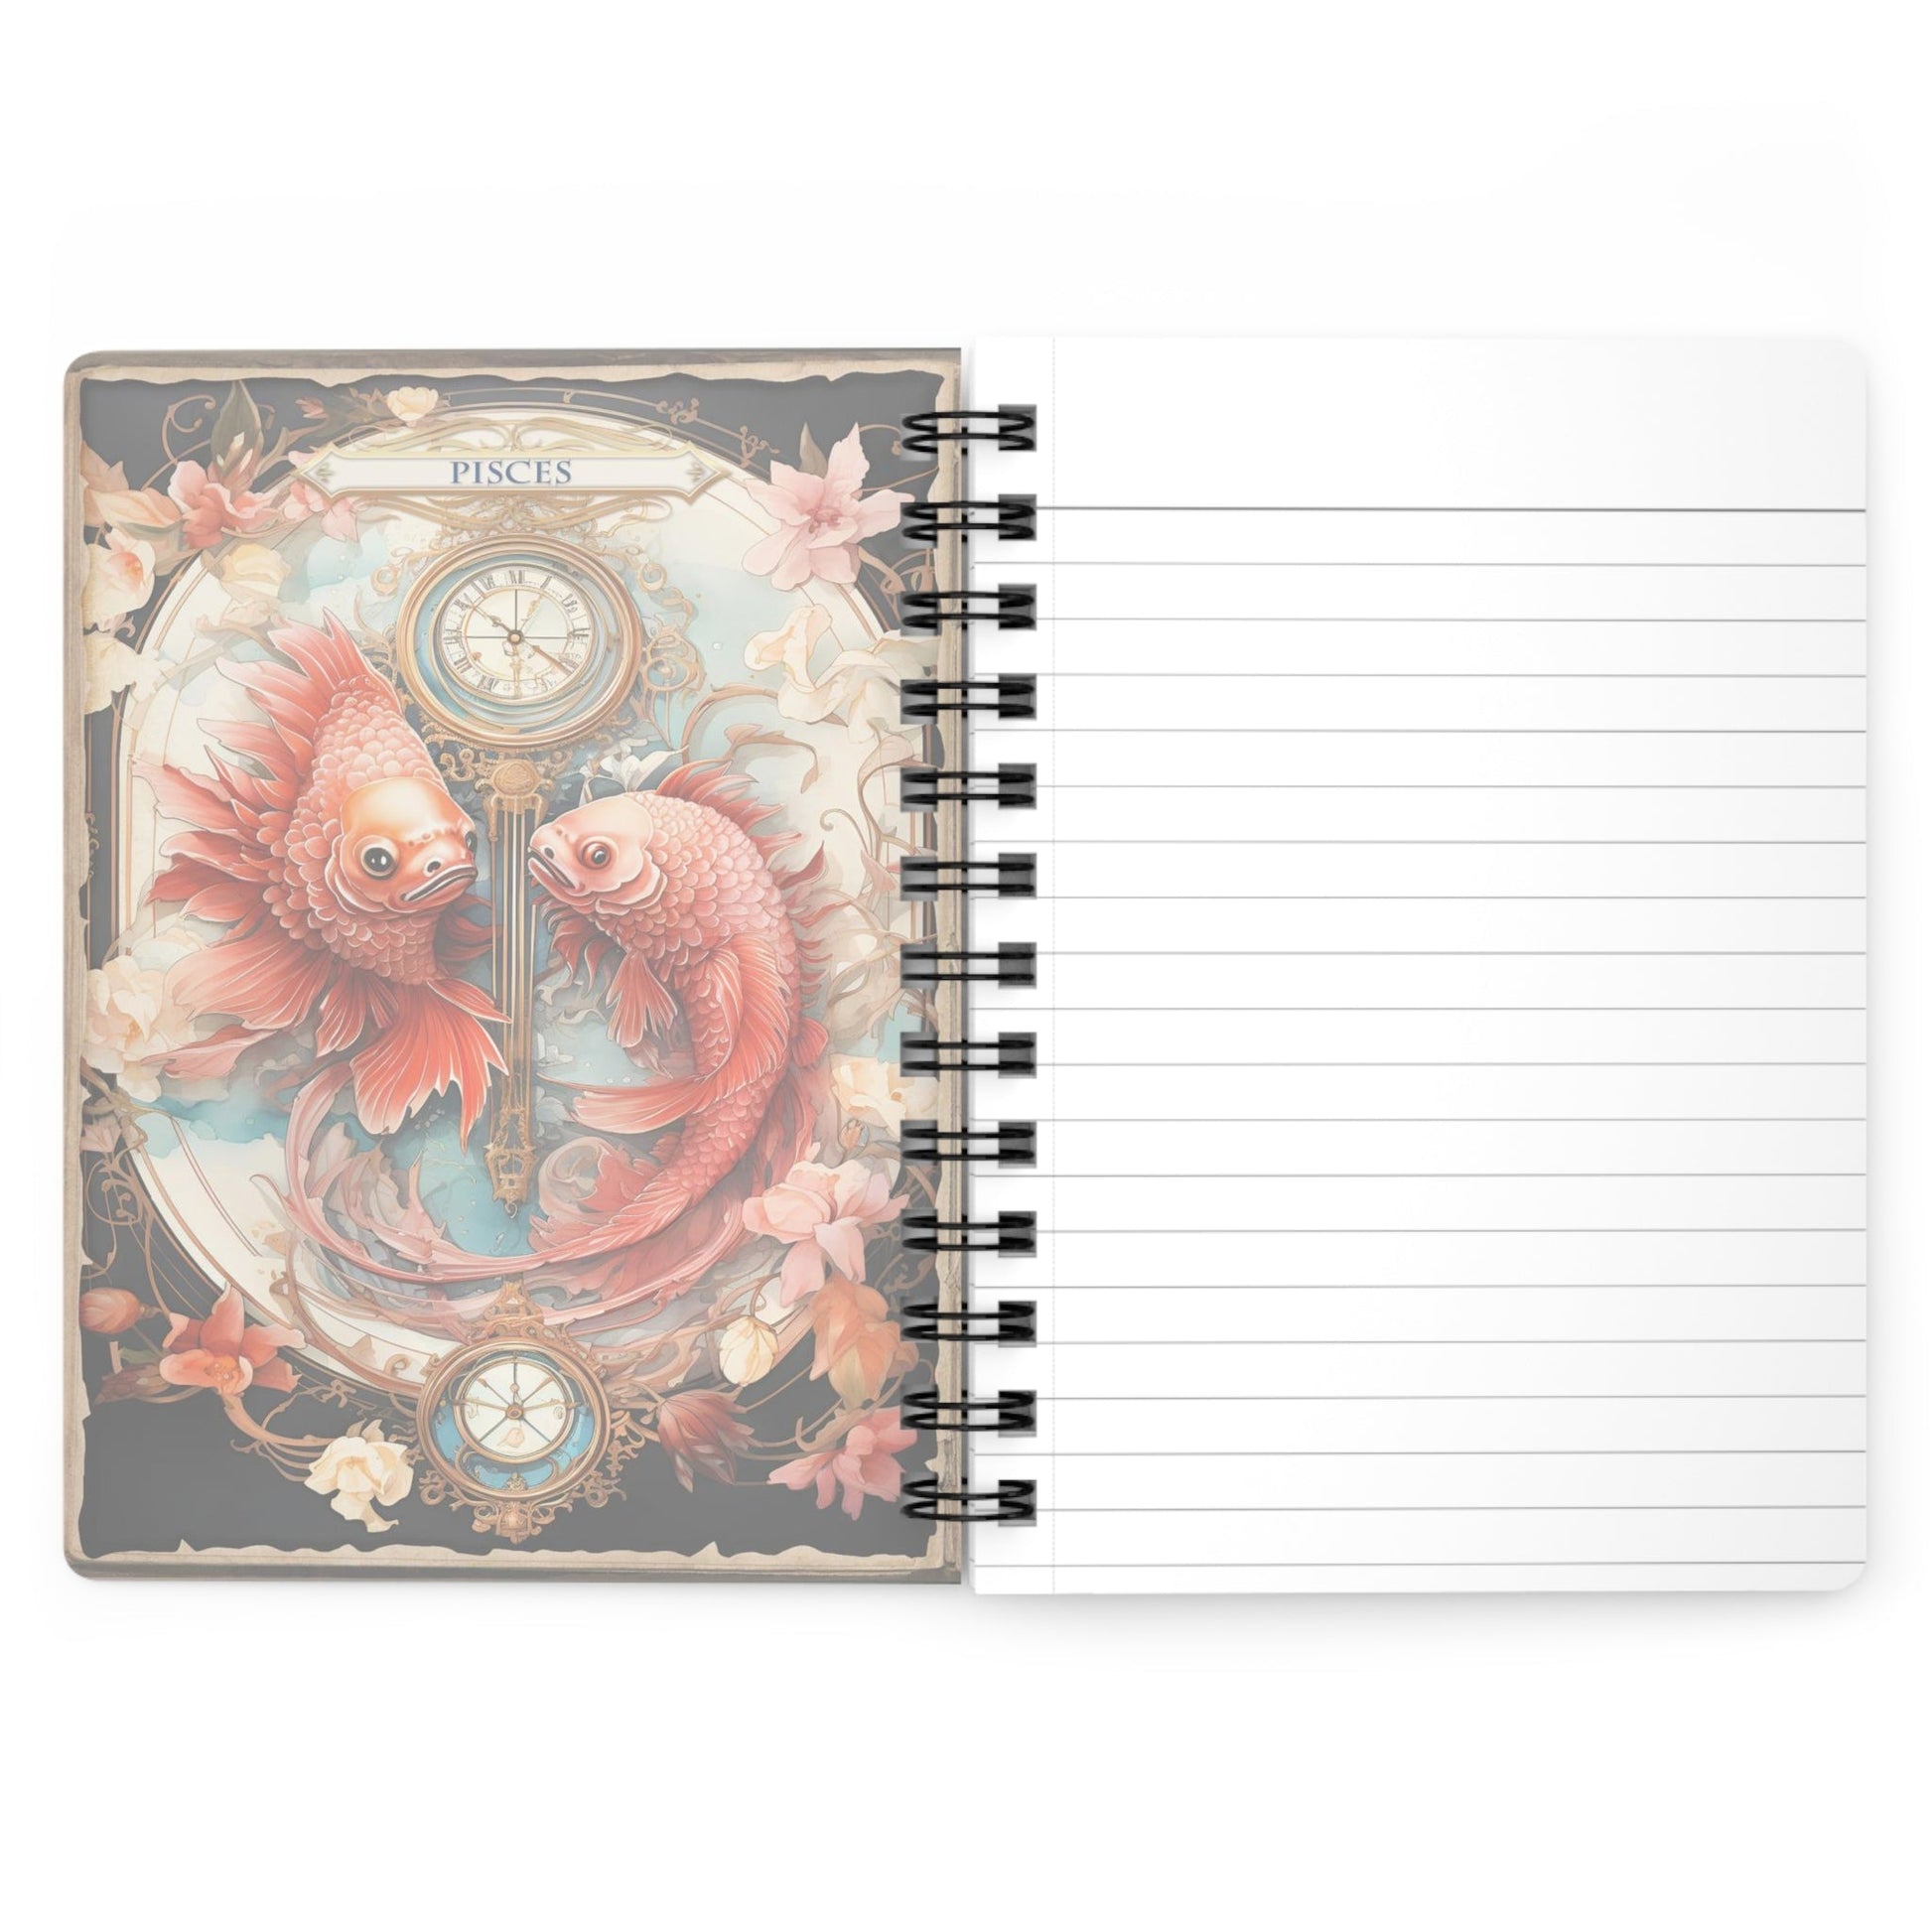 CrazyYetiClothing, CYC, Pisces - Floral Collection (Spiral Bound Journal), Paper products